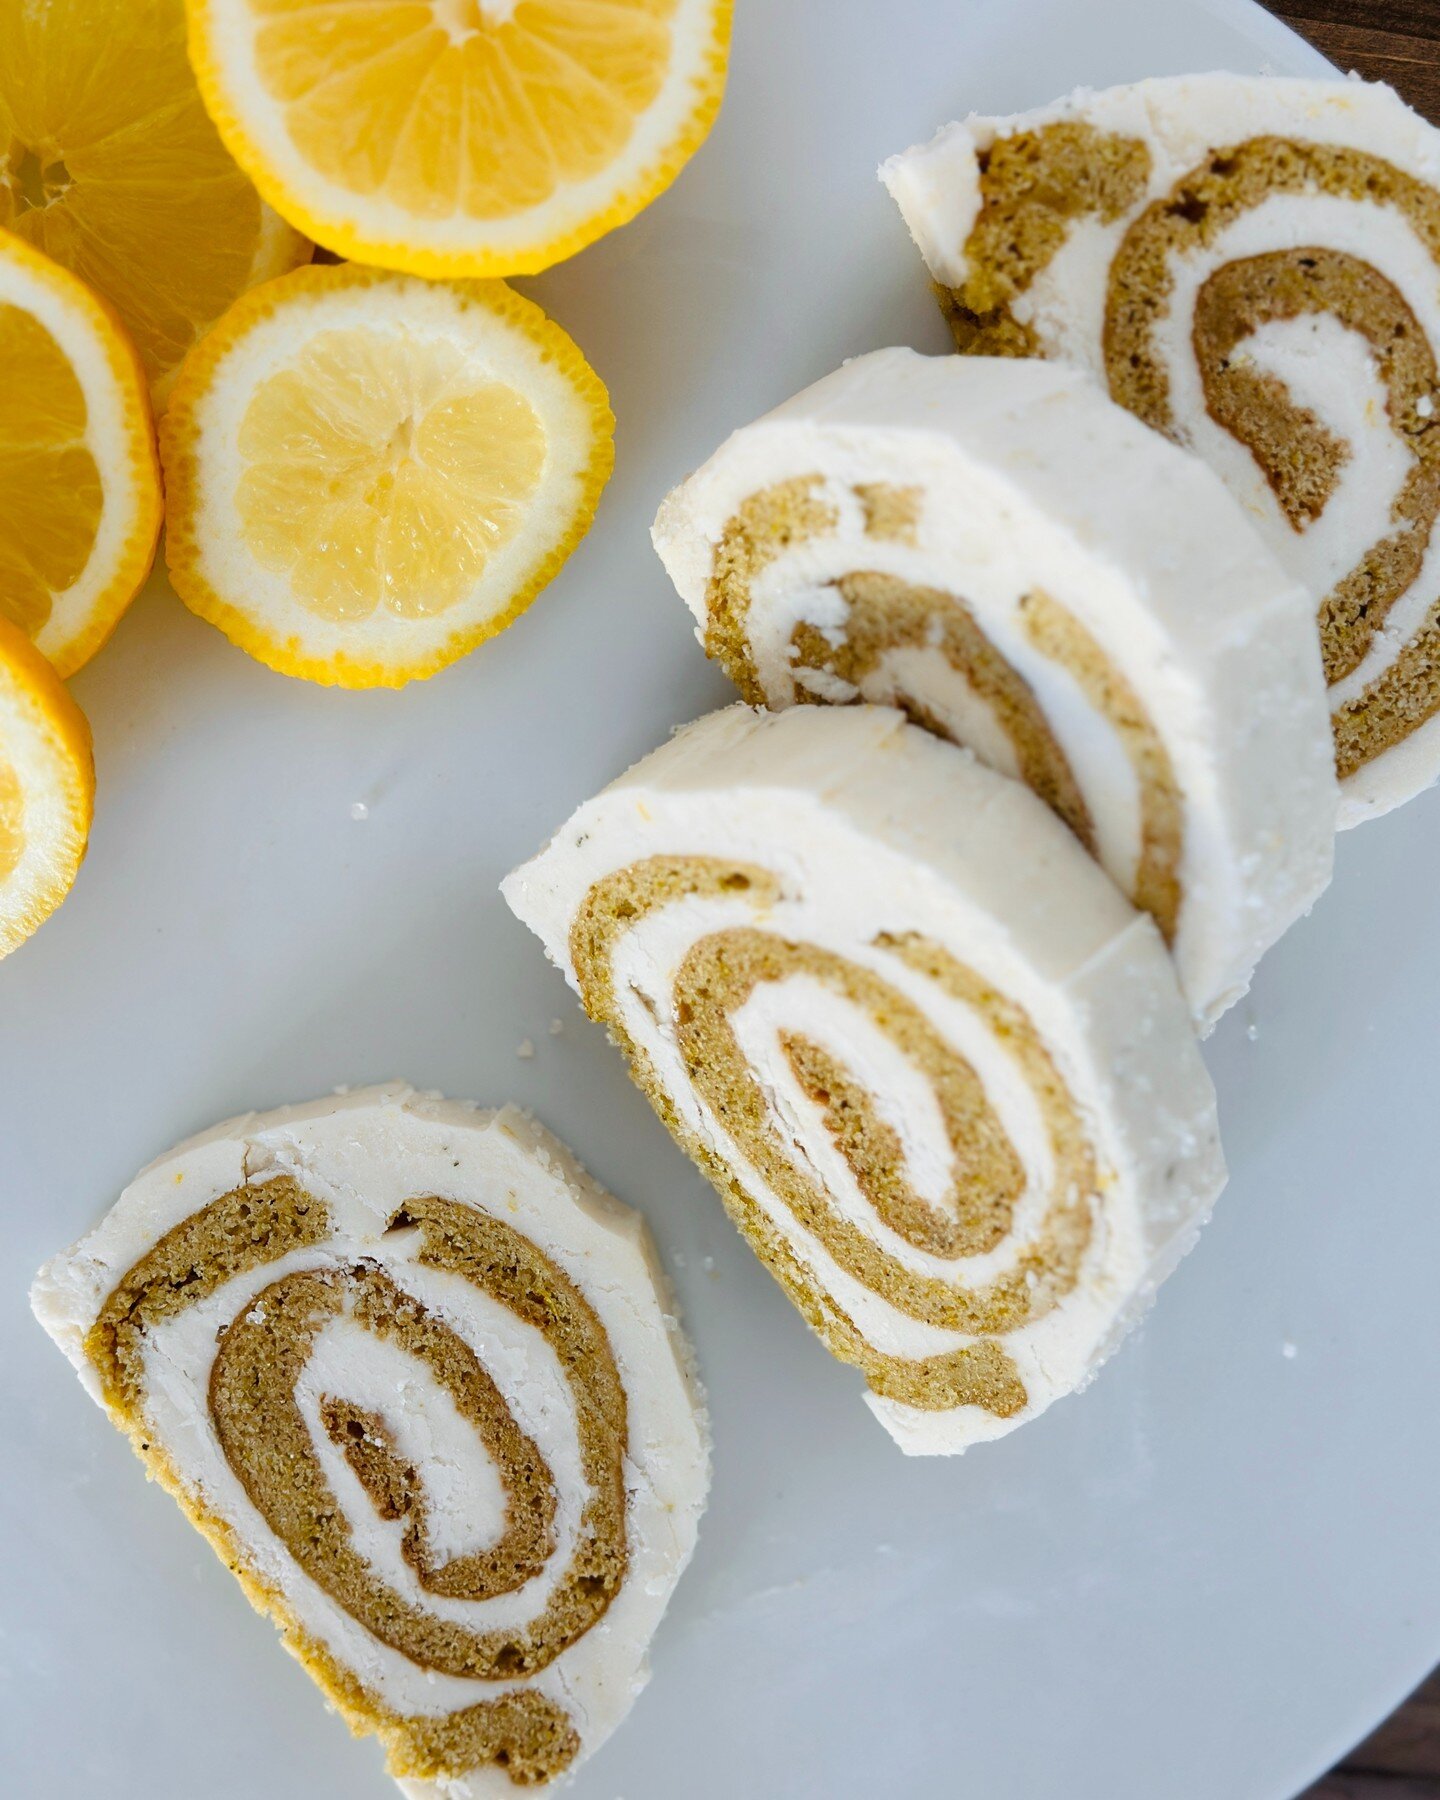 C A K E R O L L

Our cake roll on rotation is Lemon Rosemary Olive Oil!

This cake flavor is a staff favorite. The olive oil makes the cake rich and moist, the hint of rosemary paired with the lemon is subtle yet flavorful.

Give it a shot today, we'